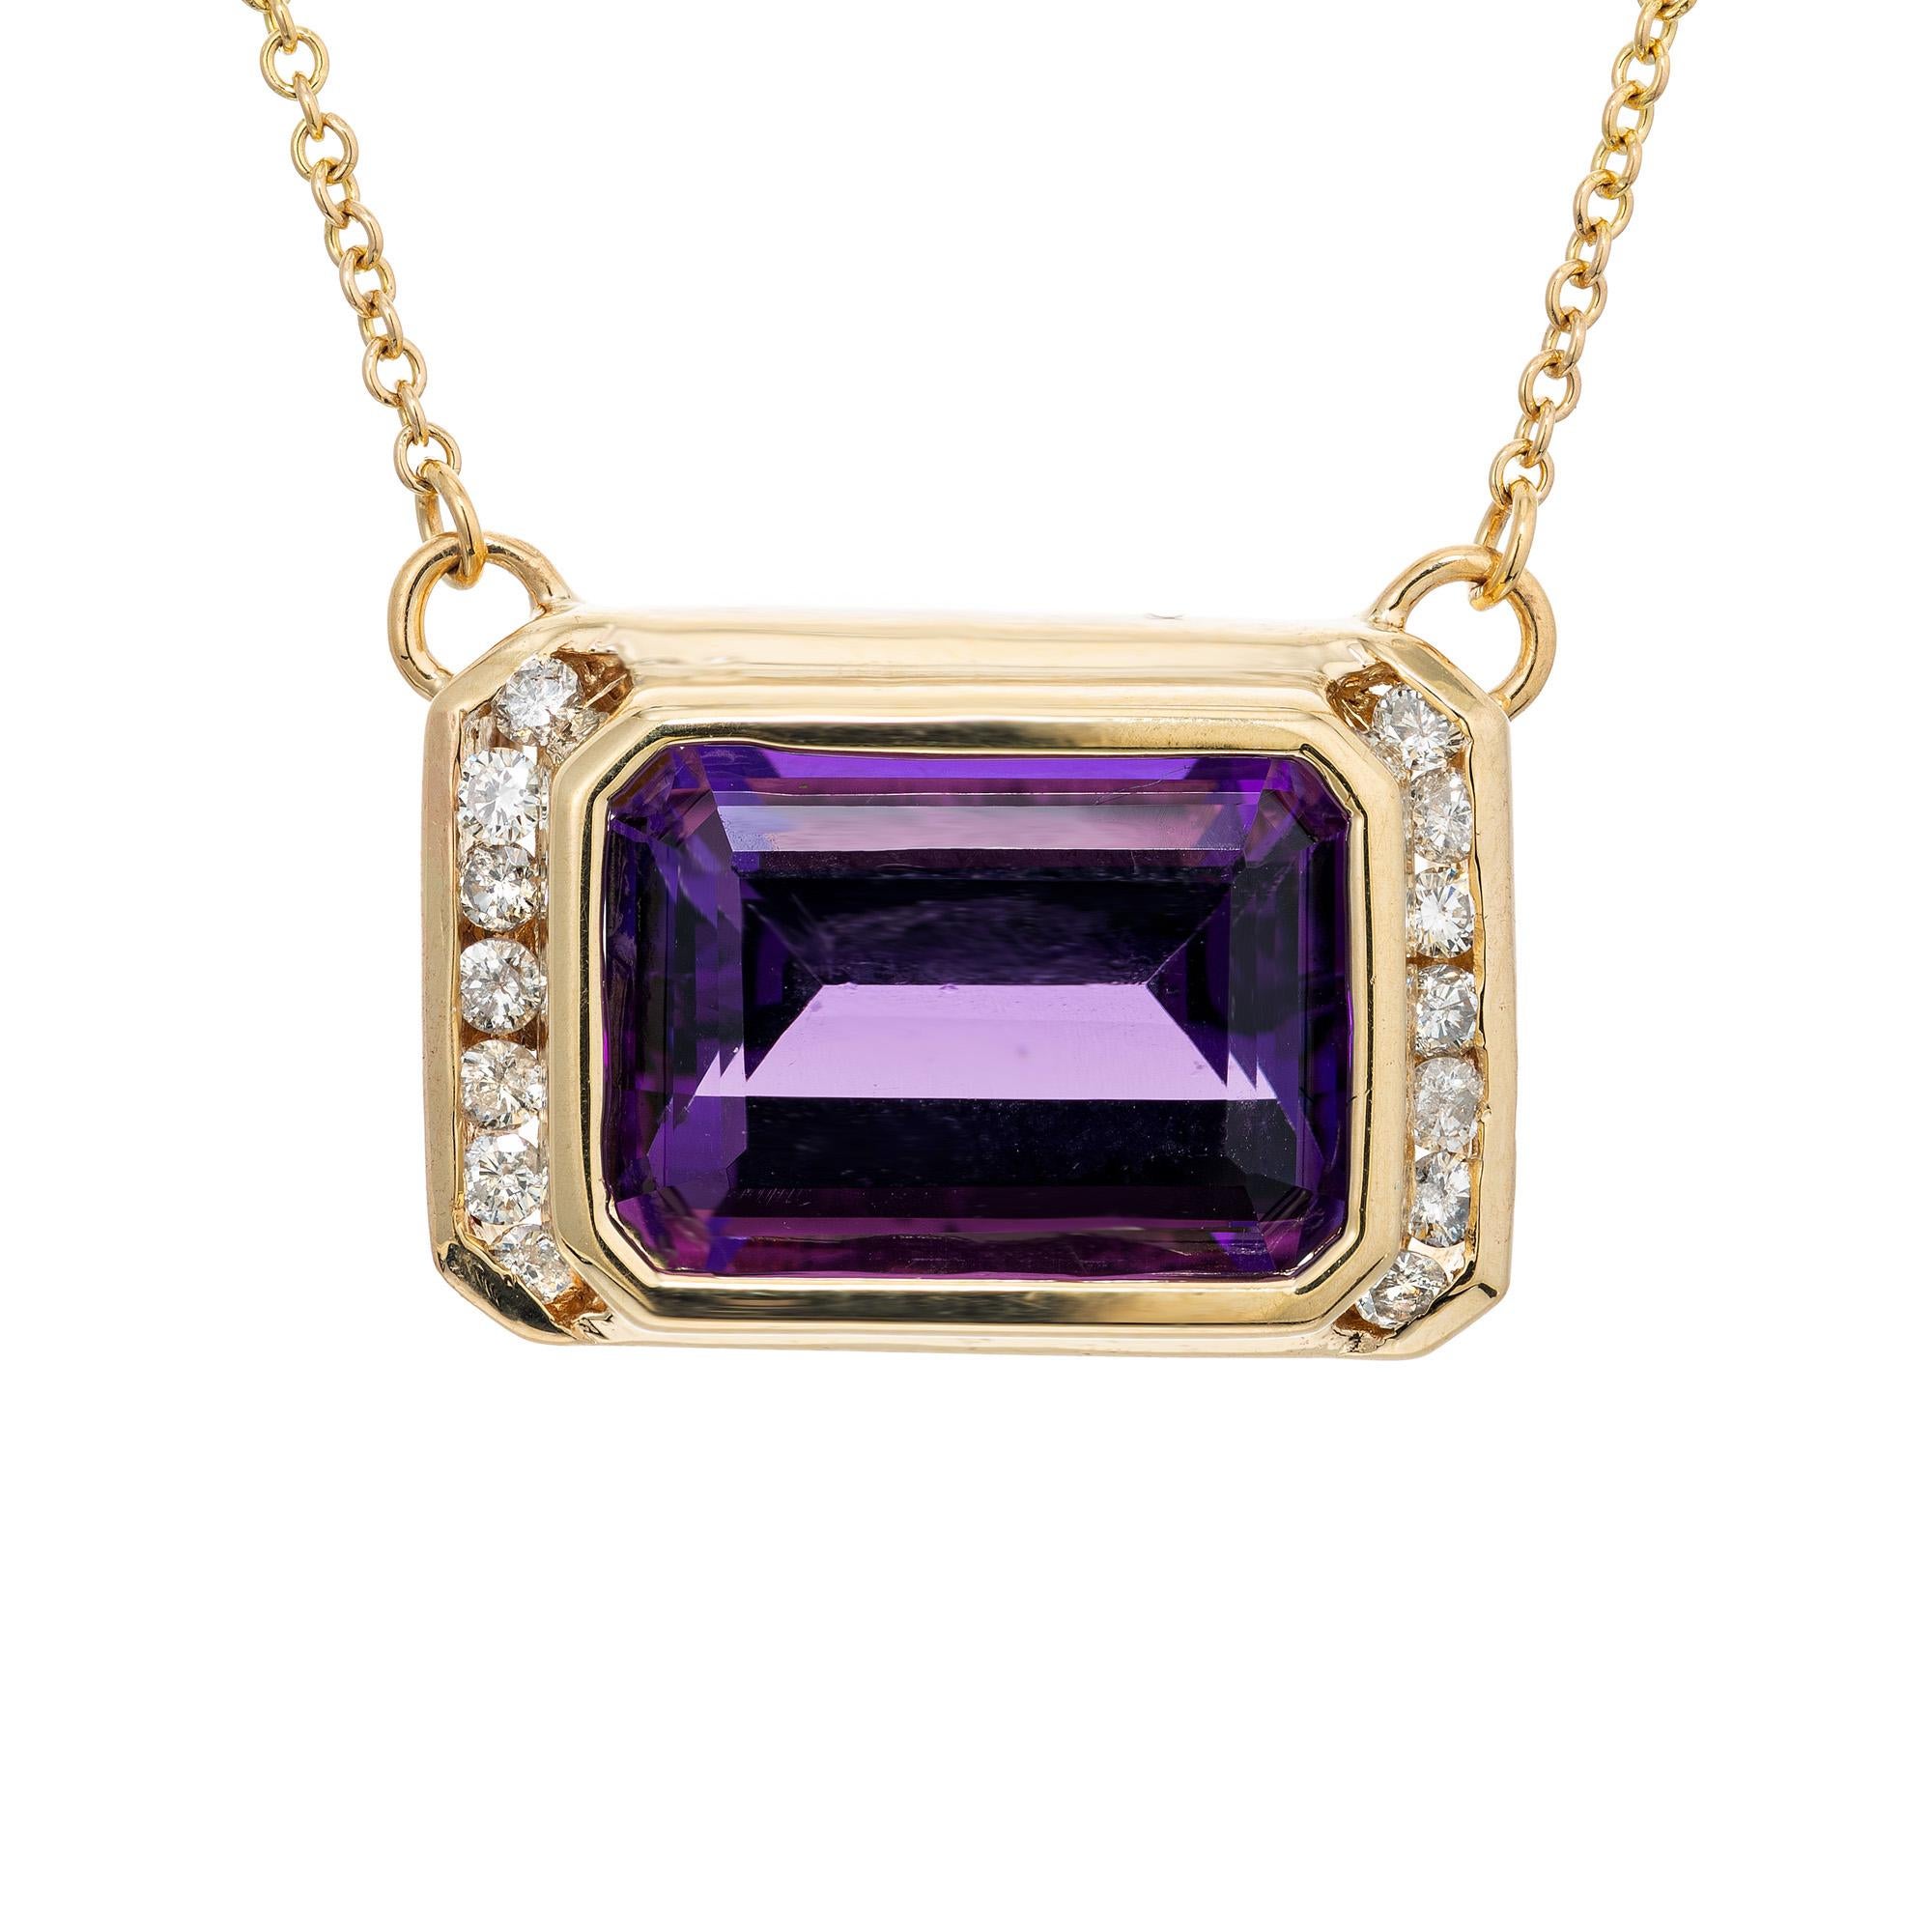 Rich purple amethyst and diamond pendant necklace. 1970's bezel set rectangular 6.56cts amethyst mounted in a solid 14k pendant accented with 7 round brilliant cut diamonds on each side of the gemstone. This amethyst has a deep purple hue, is